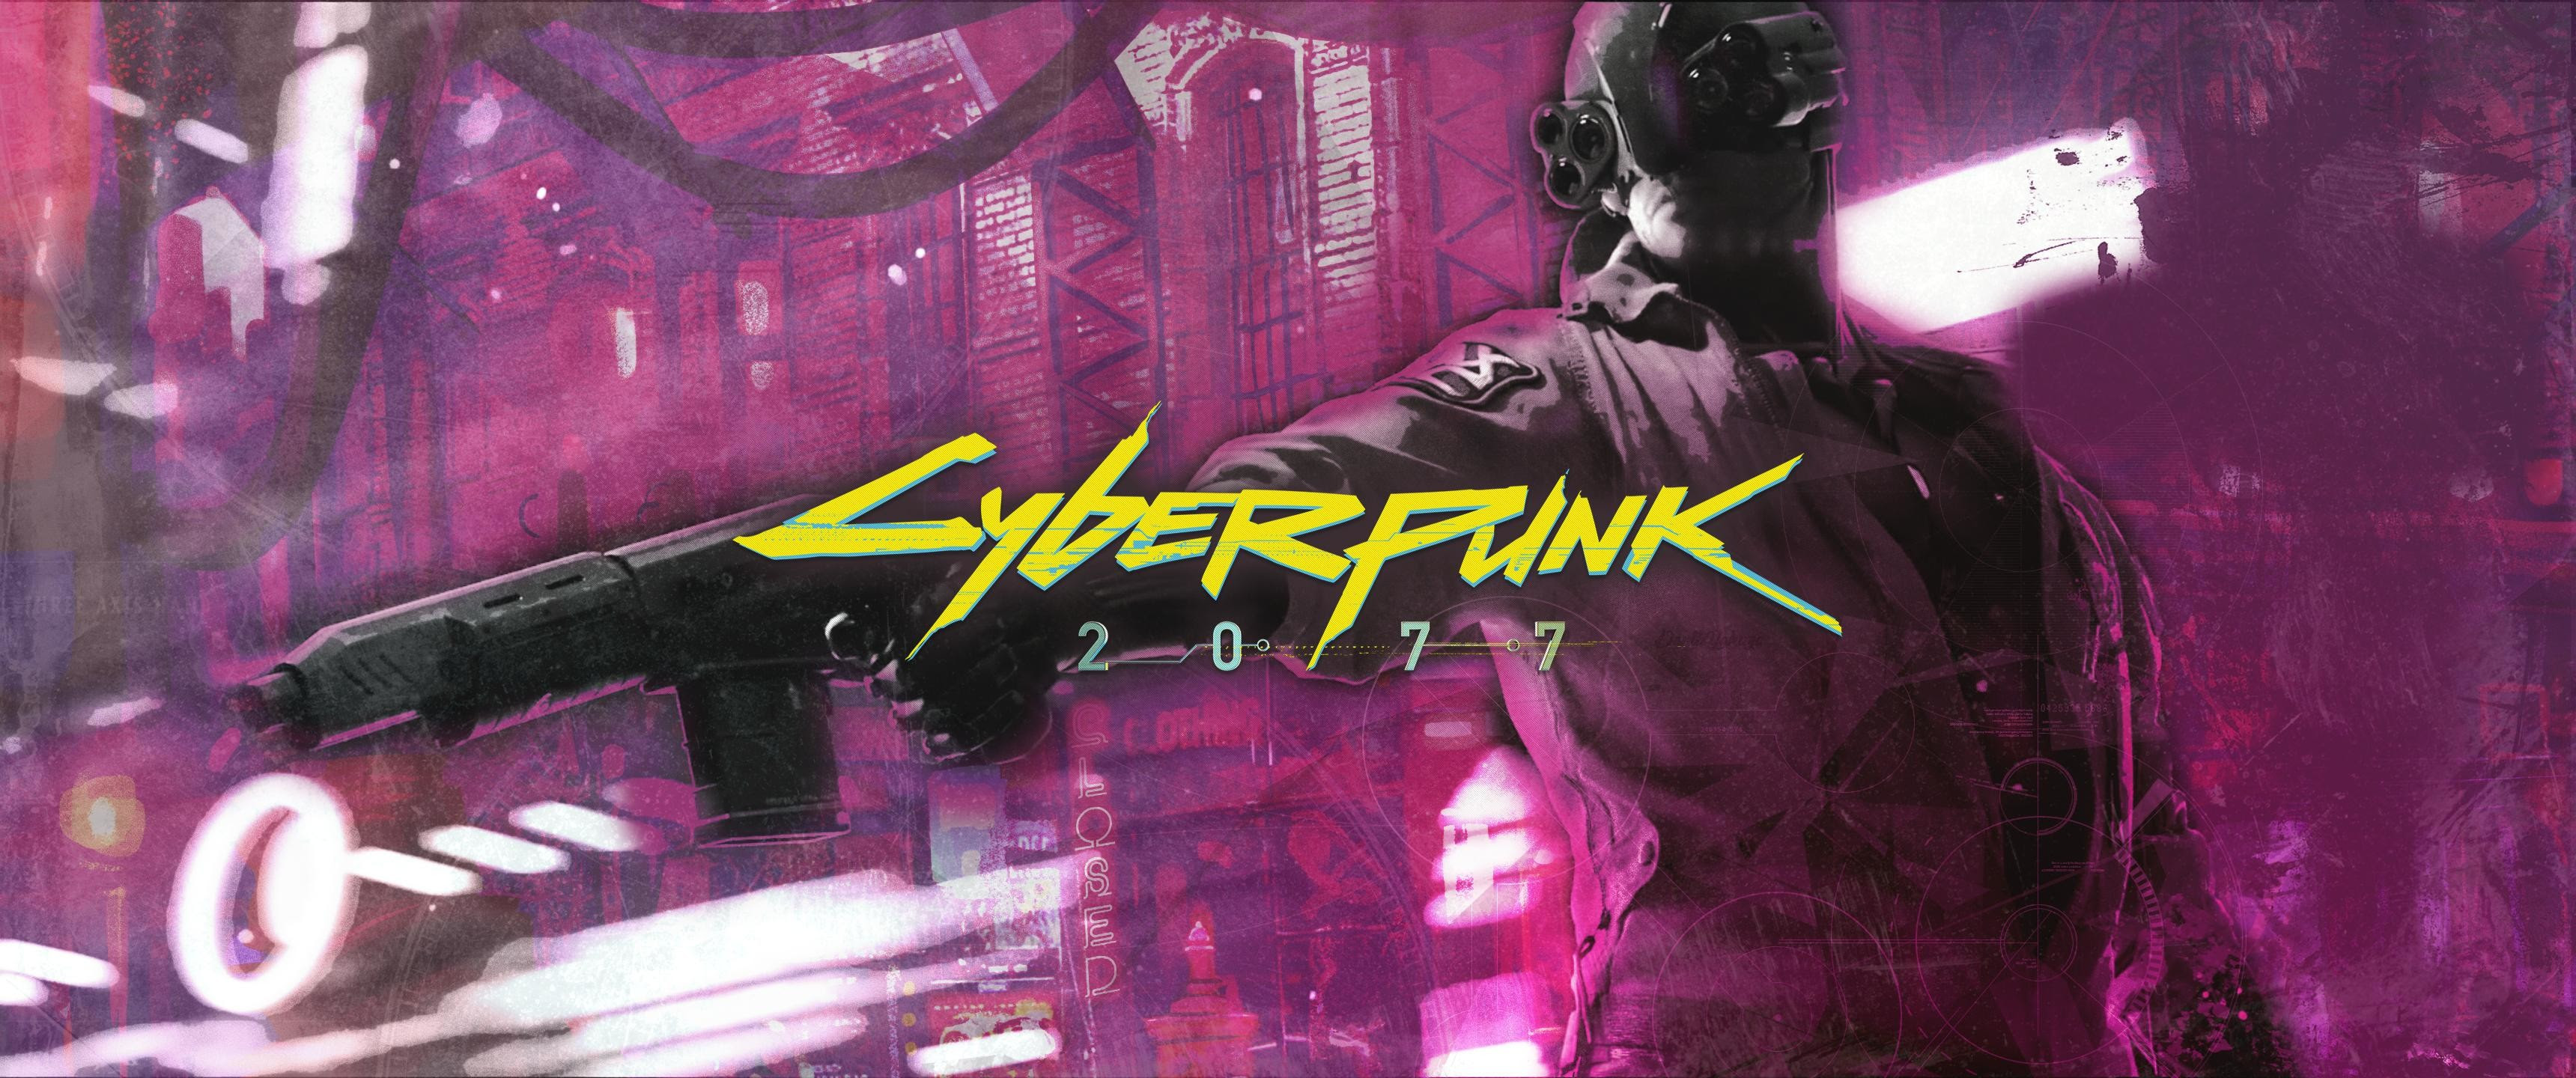 Featured image of post High Resolution Cyberpunk 2077 Wallpaper 3440X1440 Cyberpunk 2077 wallpaper 4k for desktop iphone pc laptop computer android phone smartphone imac macbook tablet mobile device